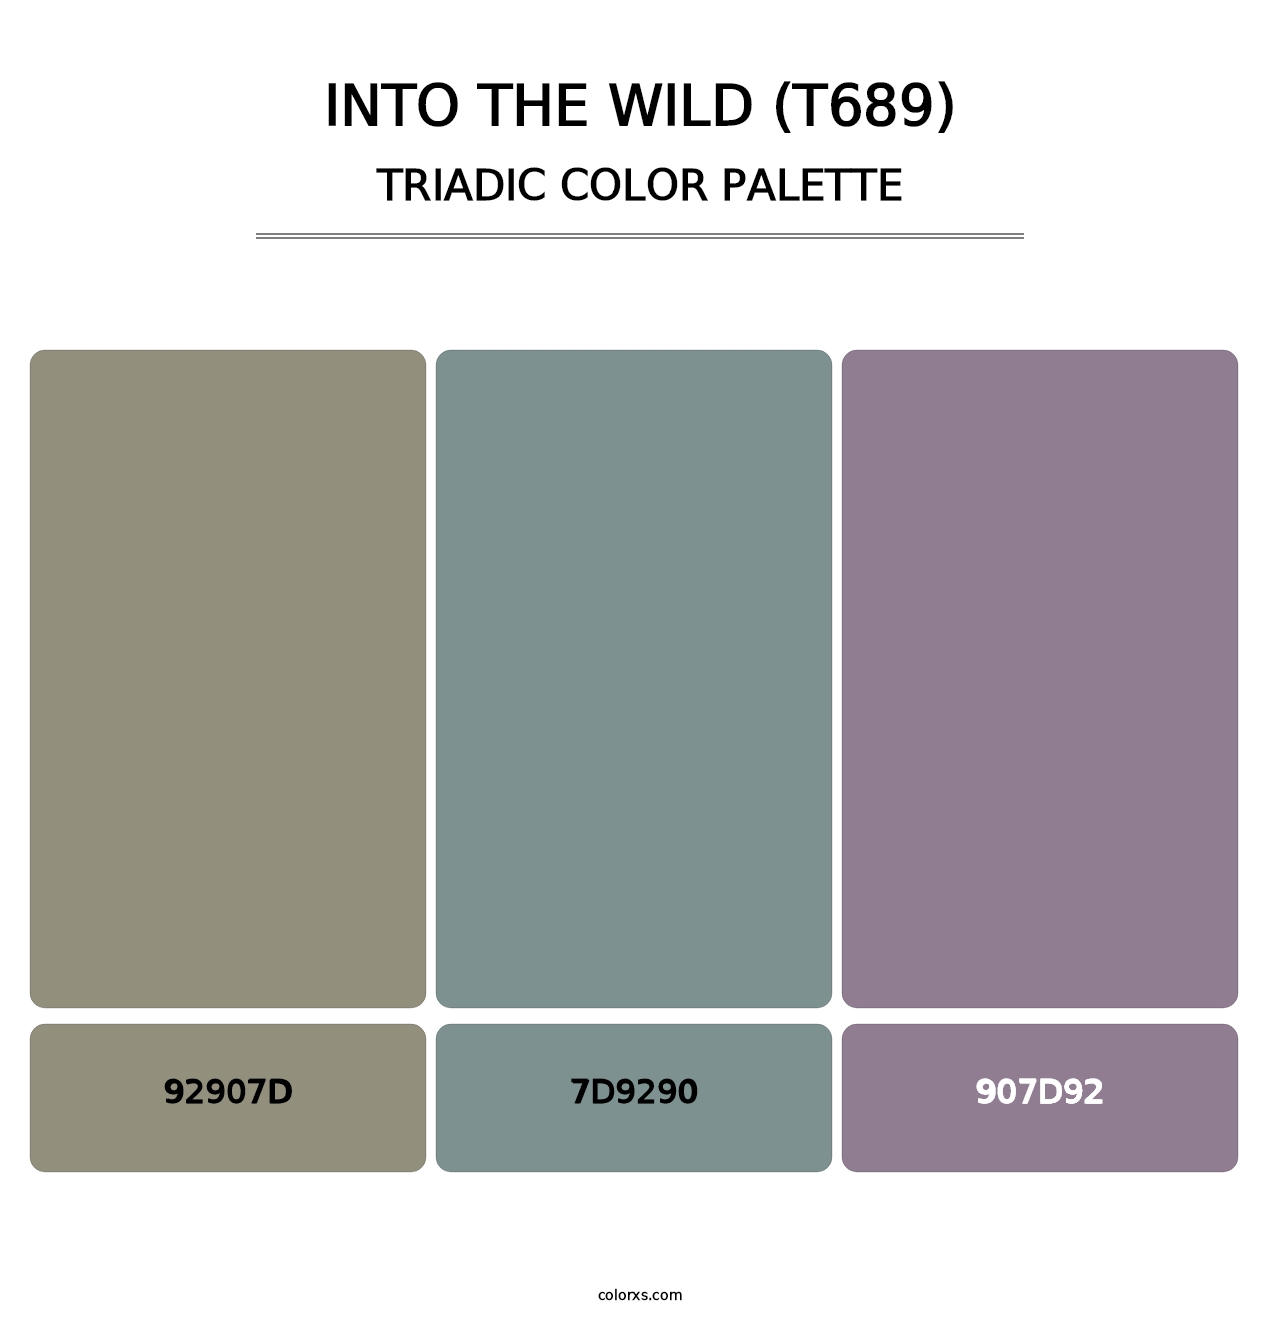 Into the Wild (T689) - Triadic Color Palette